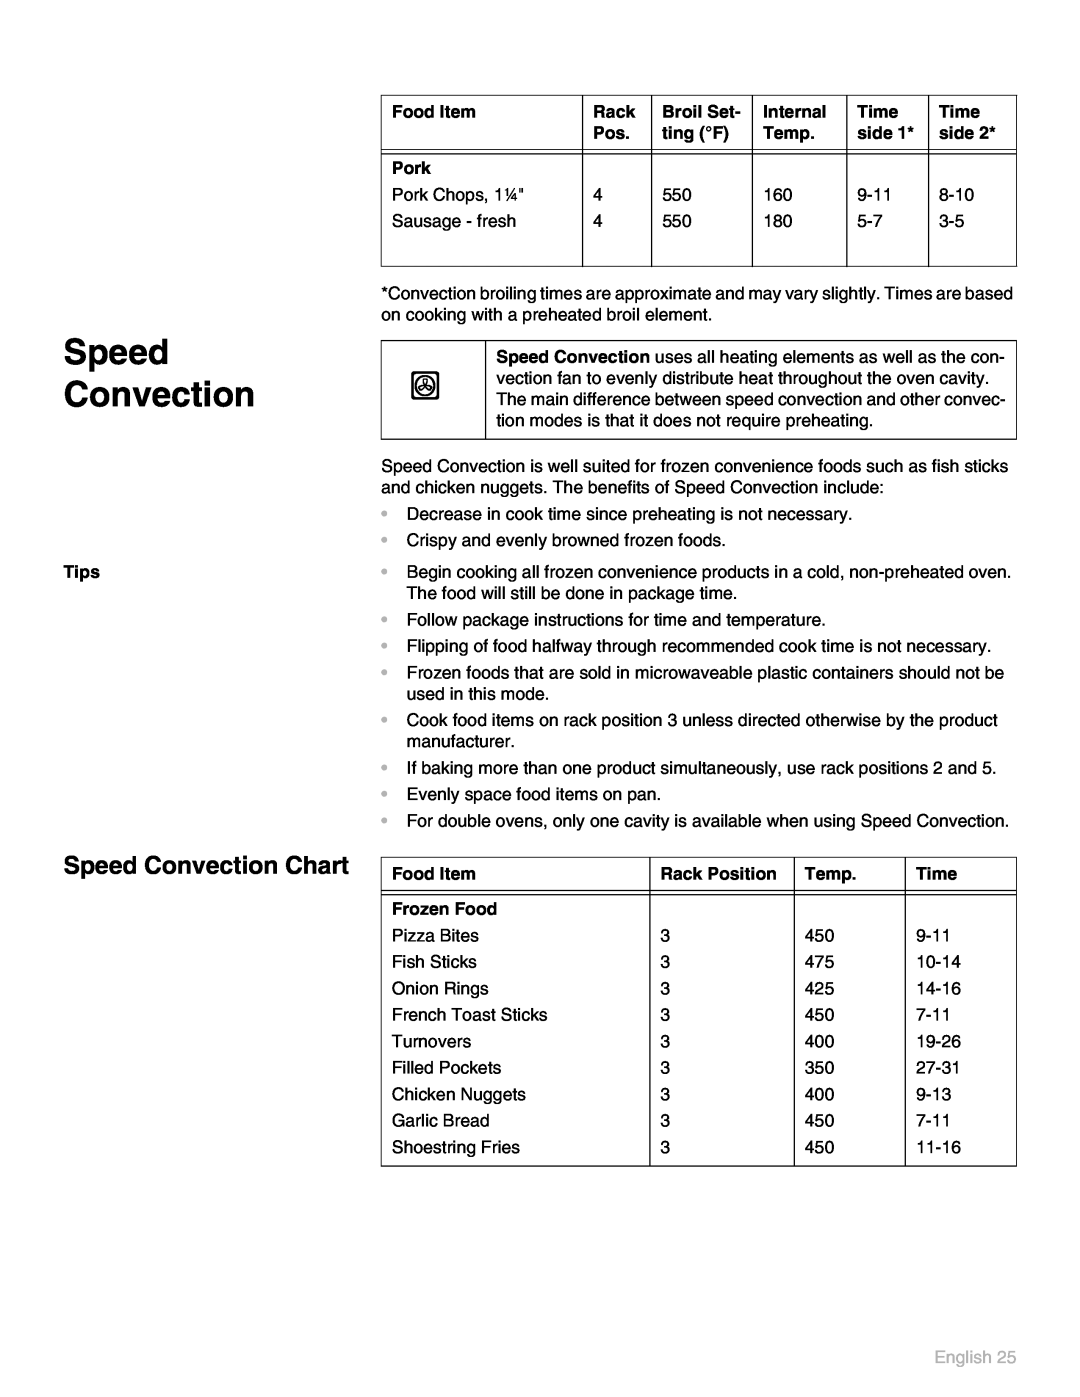 Thermador POD 302 manual Speed Convection Chart, English 